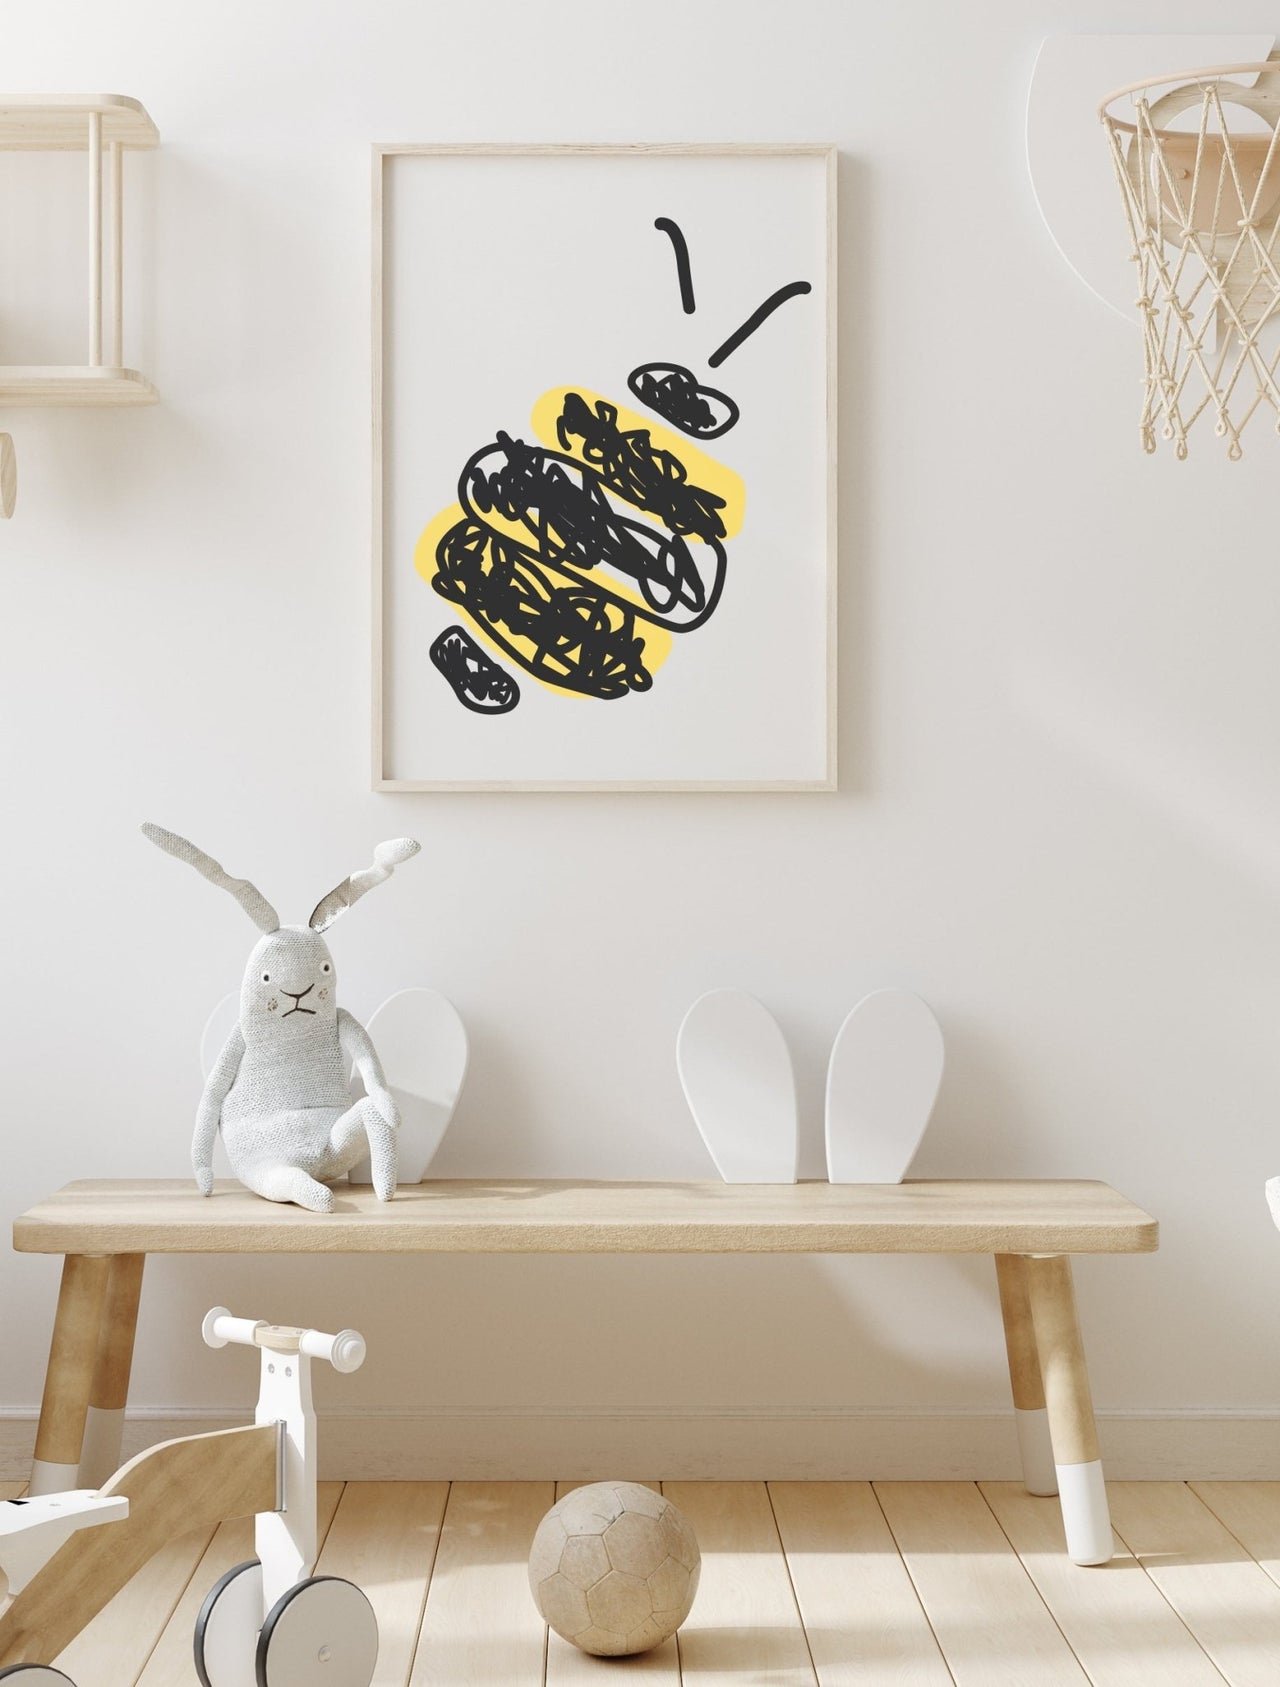 BUMBLE BEE GRAPHIC ART PRINT FOR CHILDREN WITH A PLAIN BACKGROUND